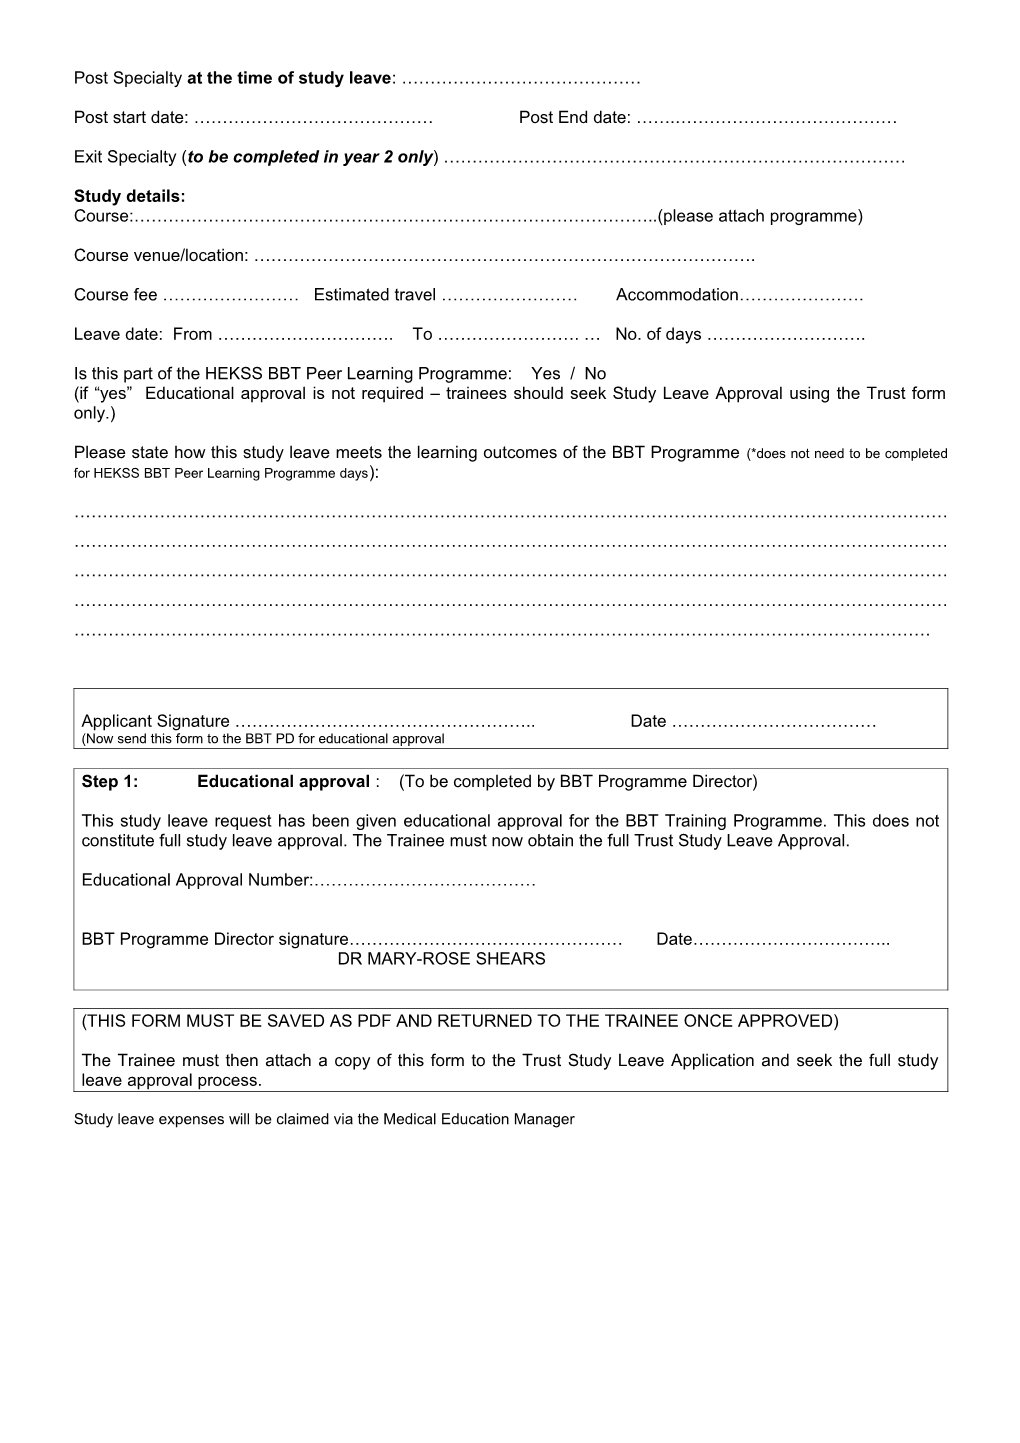 STUDY LEAVE EDUCATIONAL APPROVAL FORM BBT Trainees